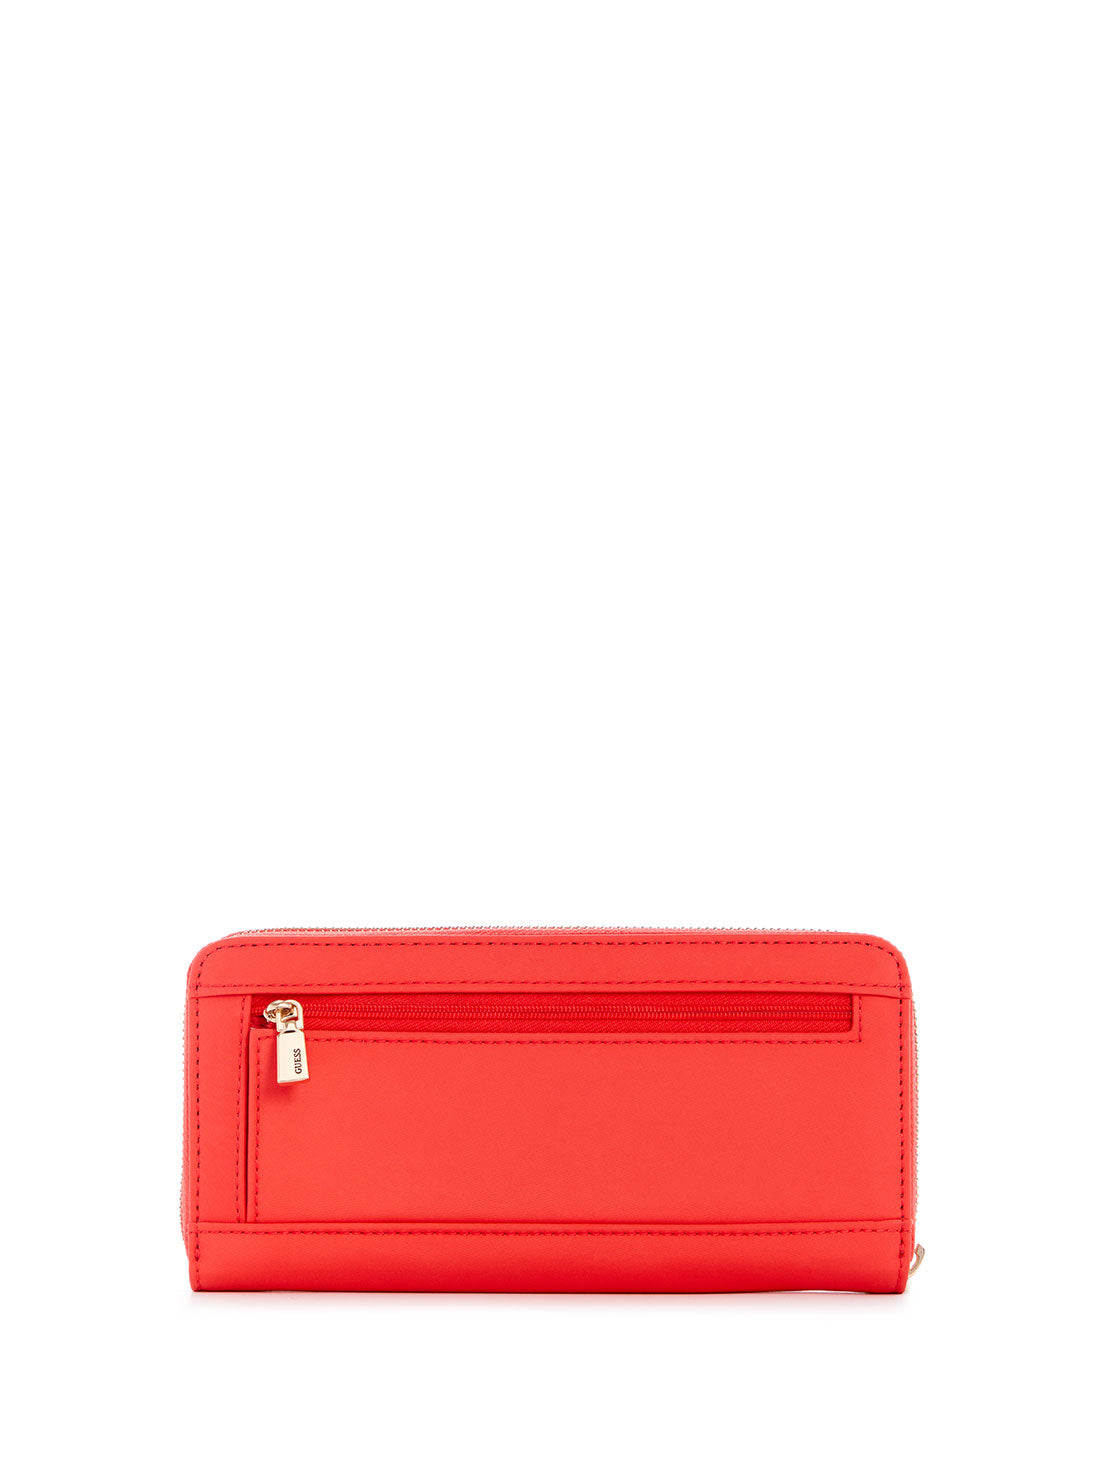 GUESS Women's Eco Red Gemma Large Wallet EYG839546 Back View